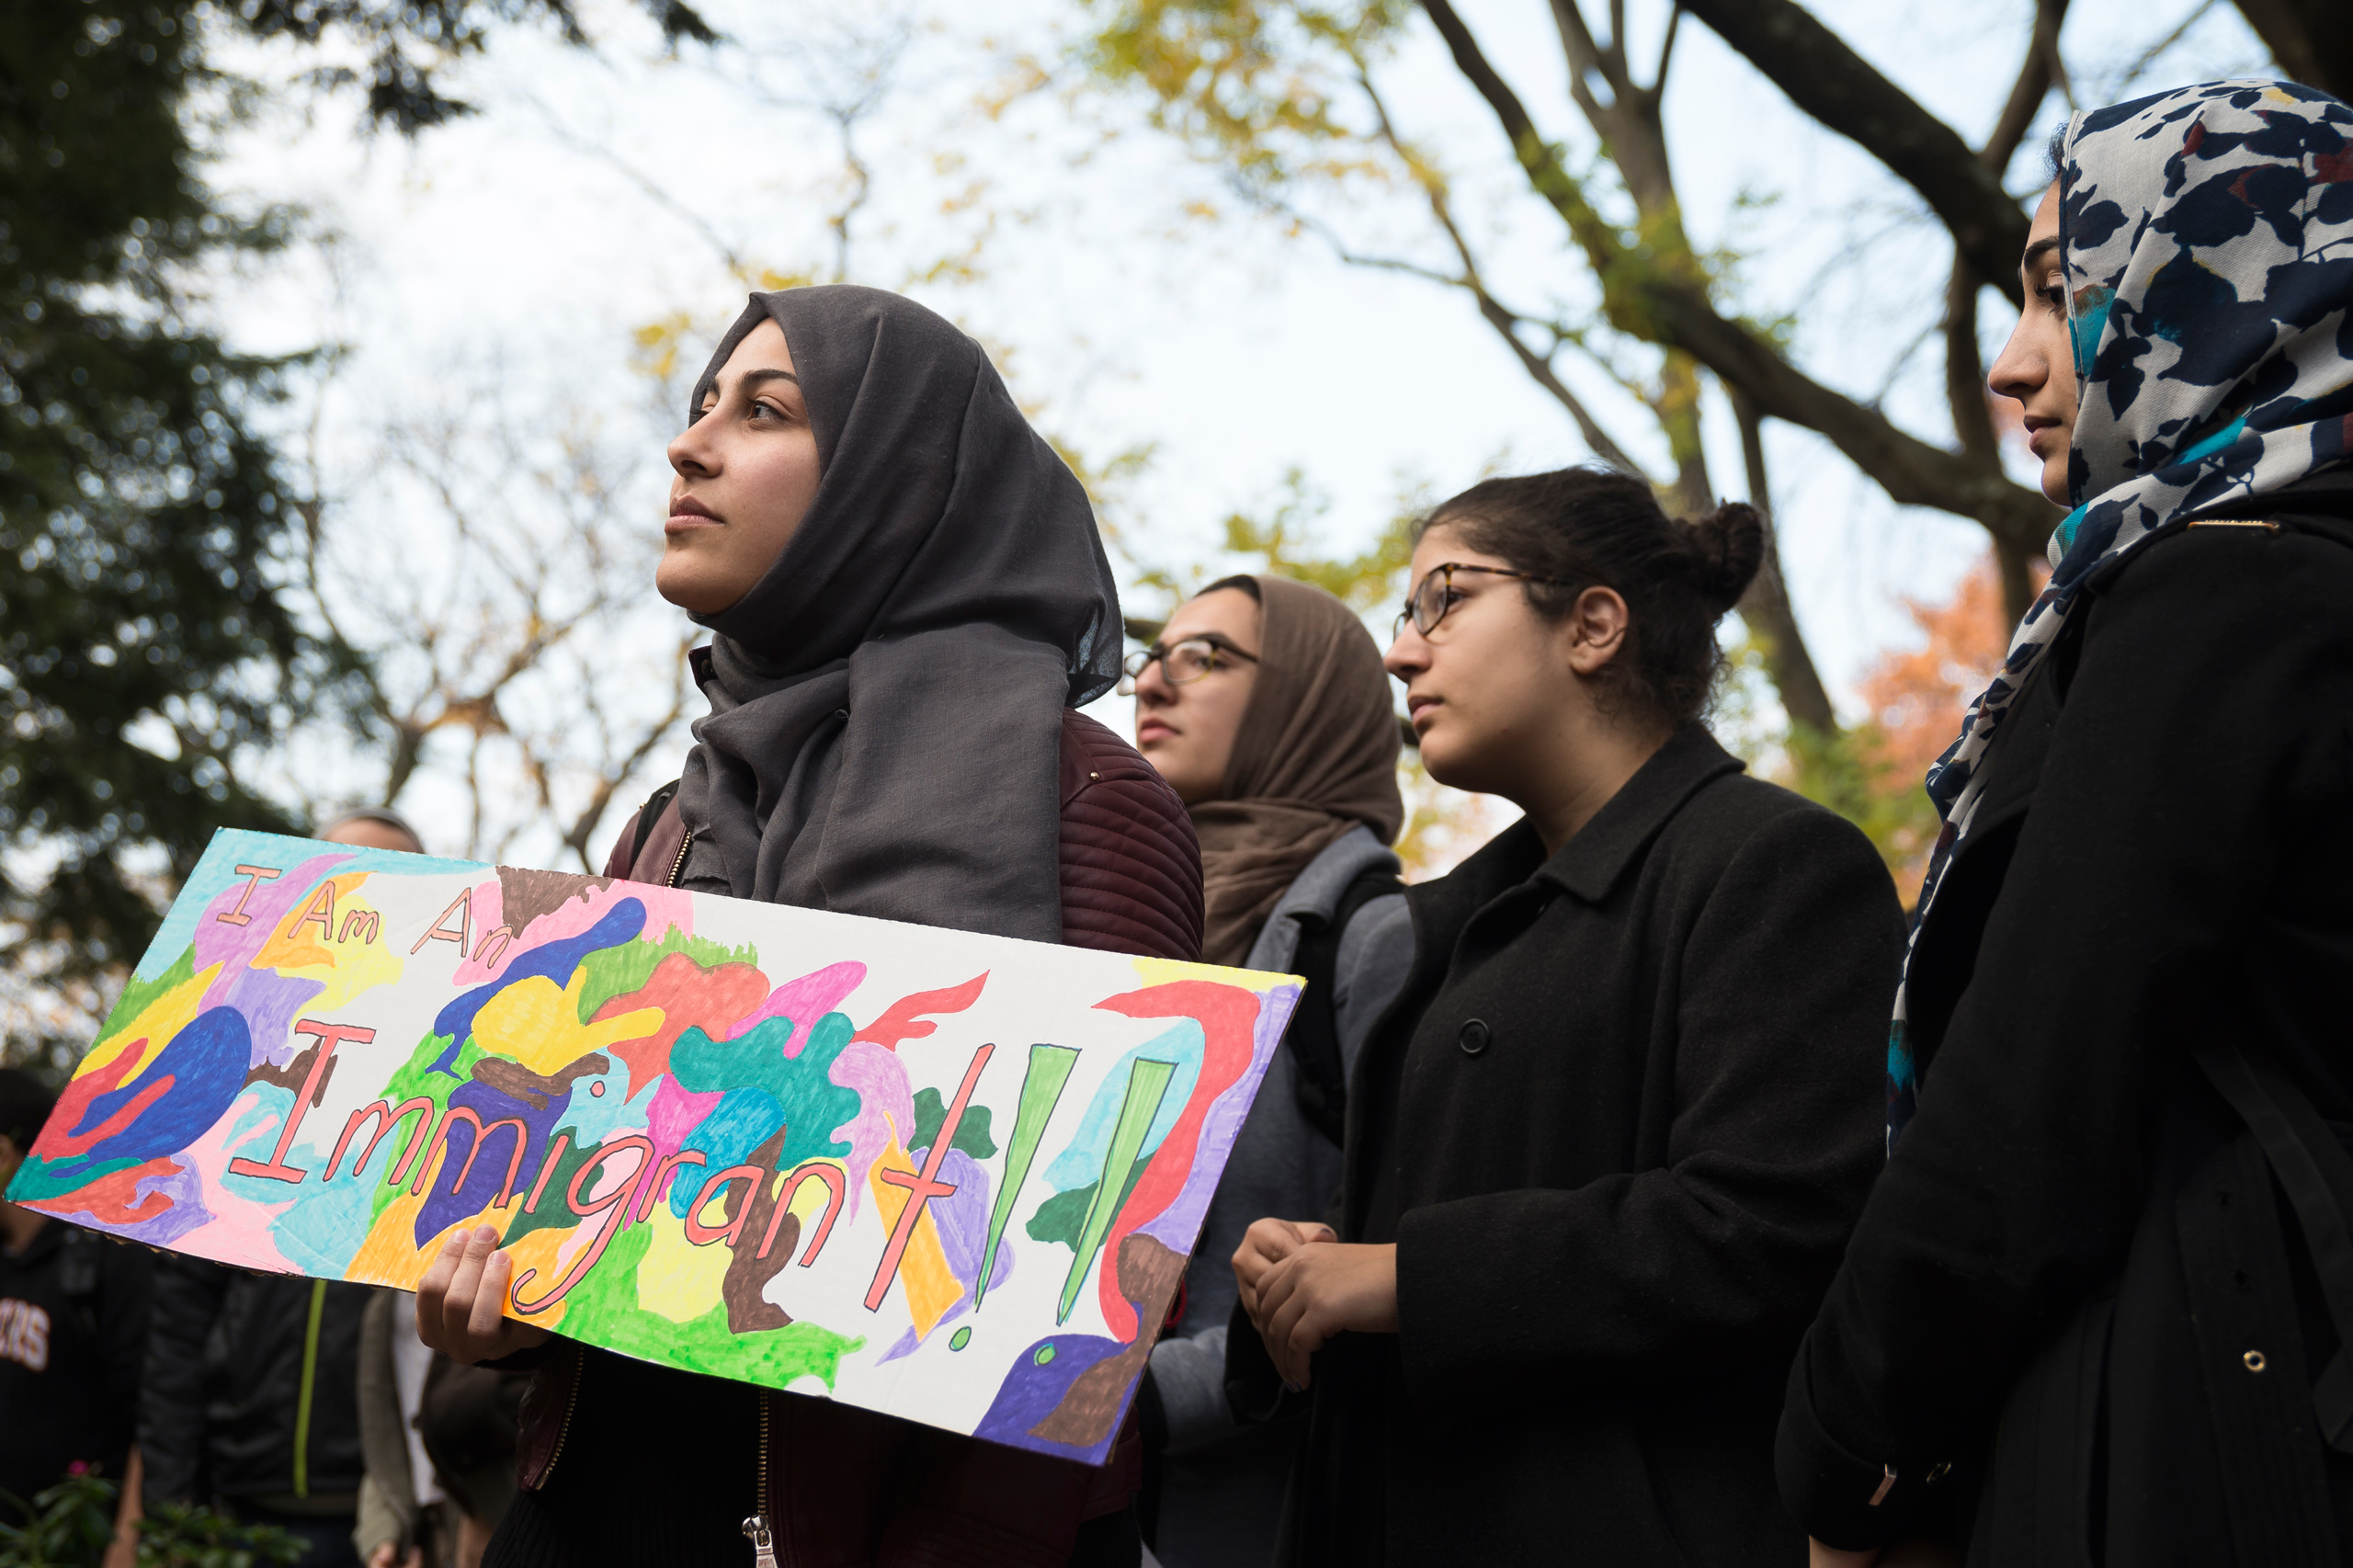 As part of a nationwide series of university student walkouts in protest of Republican President-elect Donald J. Trump's proposed policy initiatives regarding immigration and the deportation of criminal undocumented immigrants, nearly a thousand students and faculty members at Rutgers University staged a rally and march in downtown New Brunswick, N.J., on Nov.16, 2016. (Albin Lohr-Jones—Sipa USA/AP)